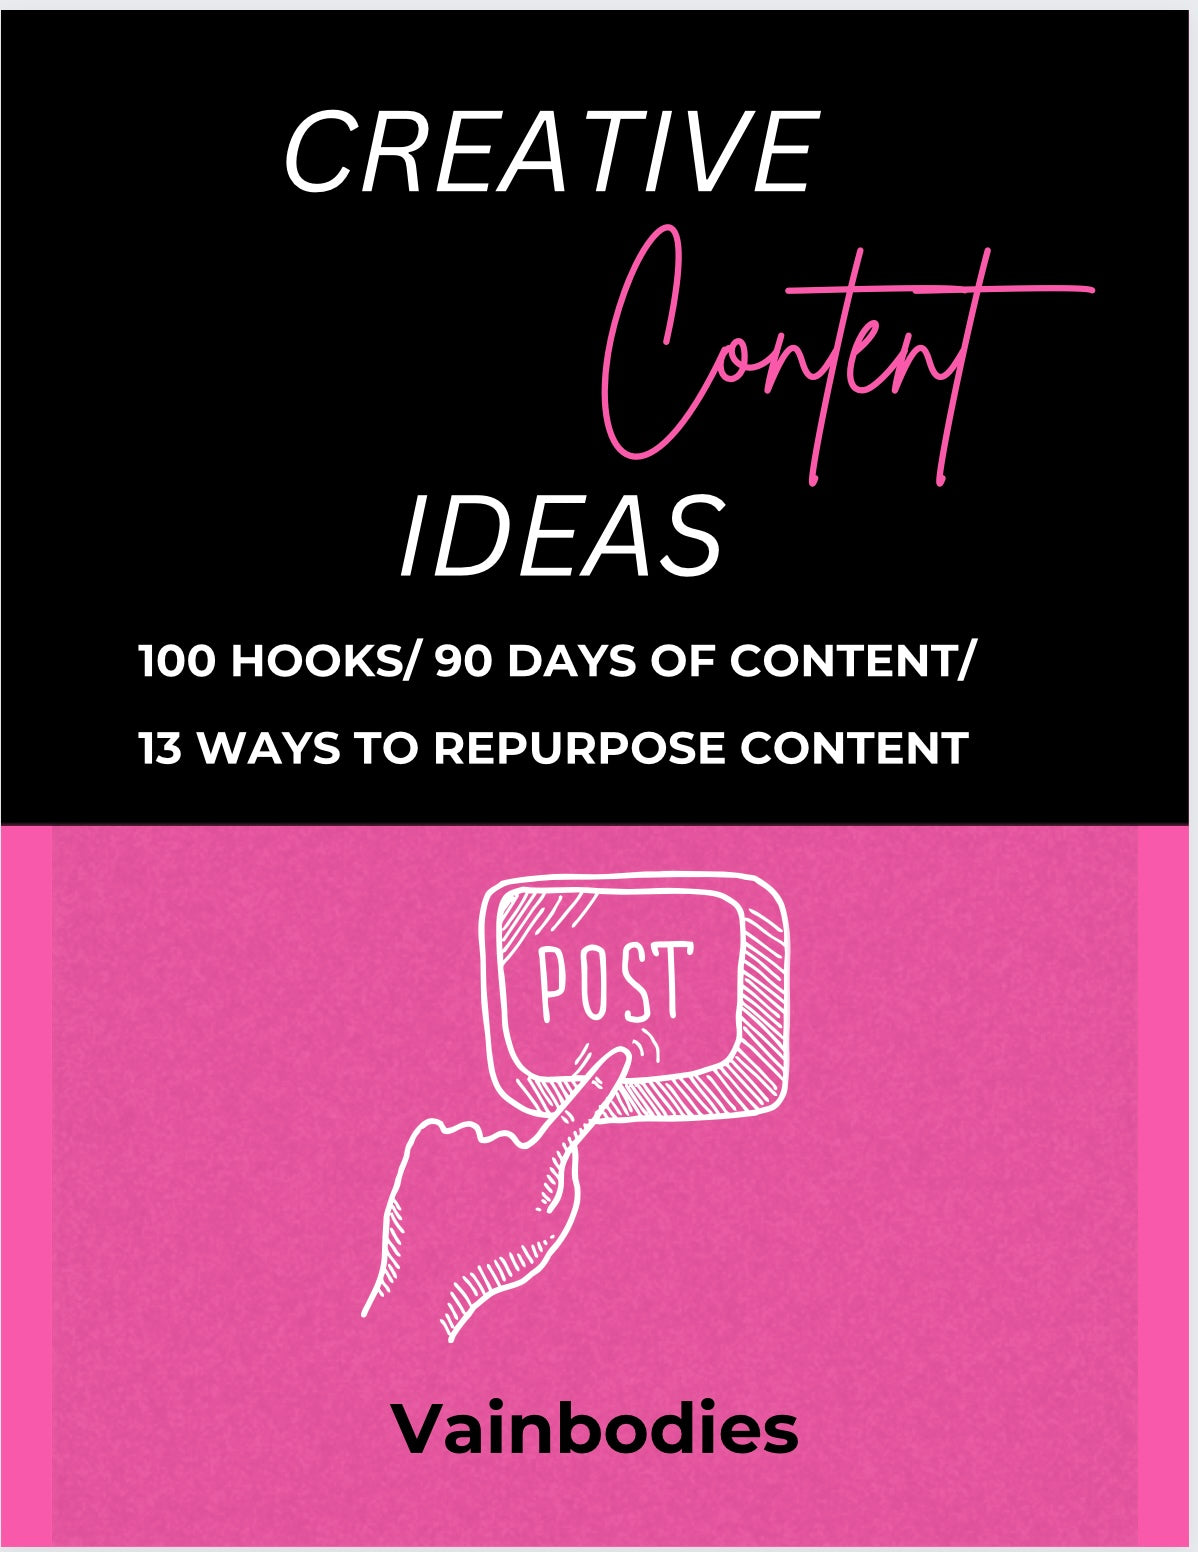 Creative content ideas { With Resell Rights }